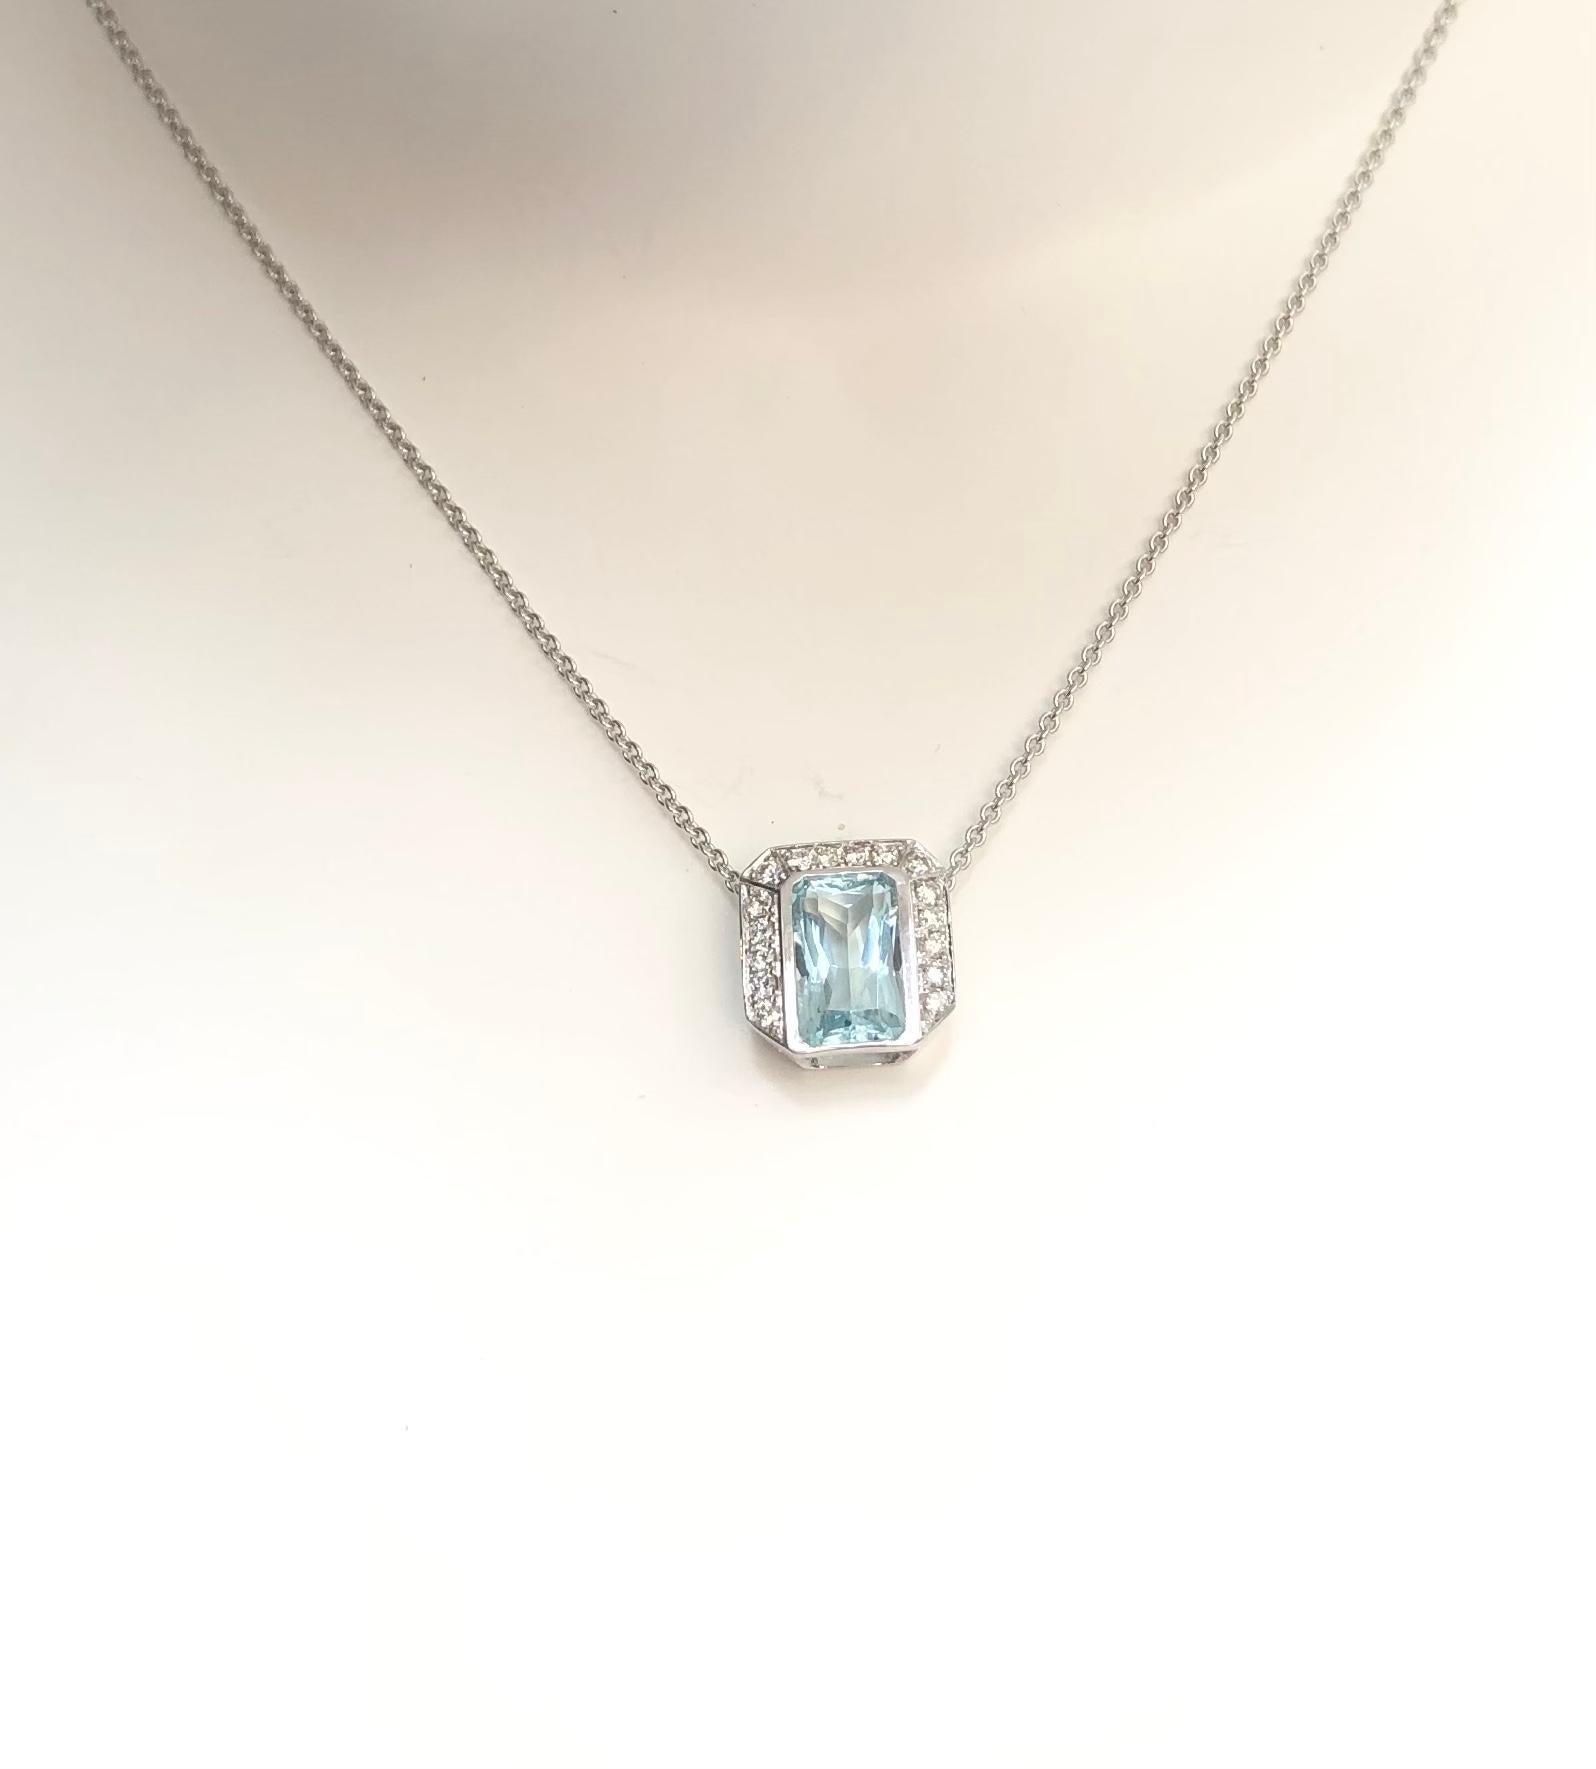 Aquamarine 2.11 carats with Diamond 0.26 carat Pendant set in 18 Karat White Gold Settings
(chain not included)

Width:  1.0 cm 
Length: 1.2 cm
Total Weight: 2.5 grams

